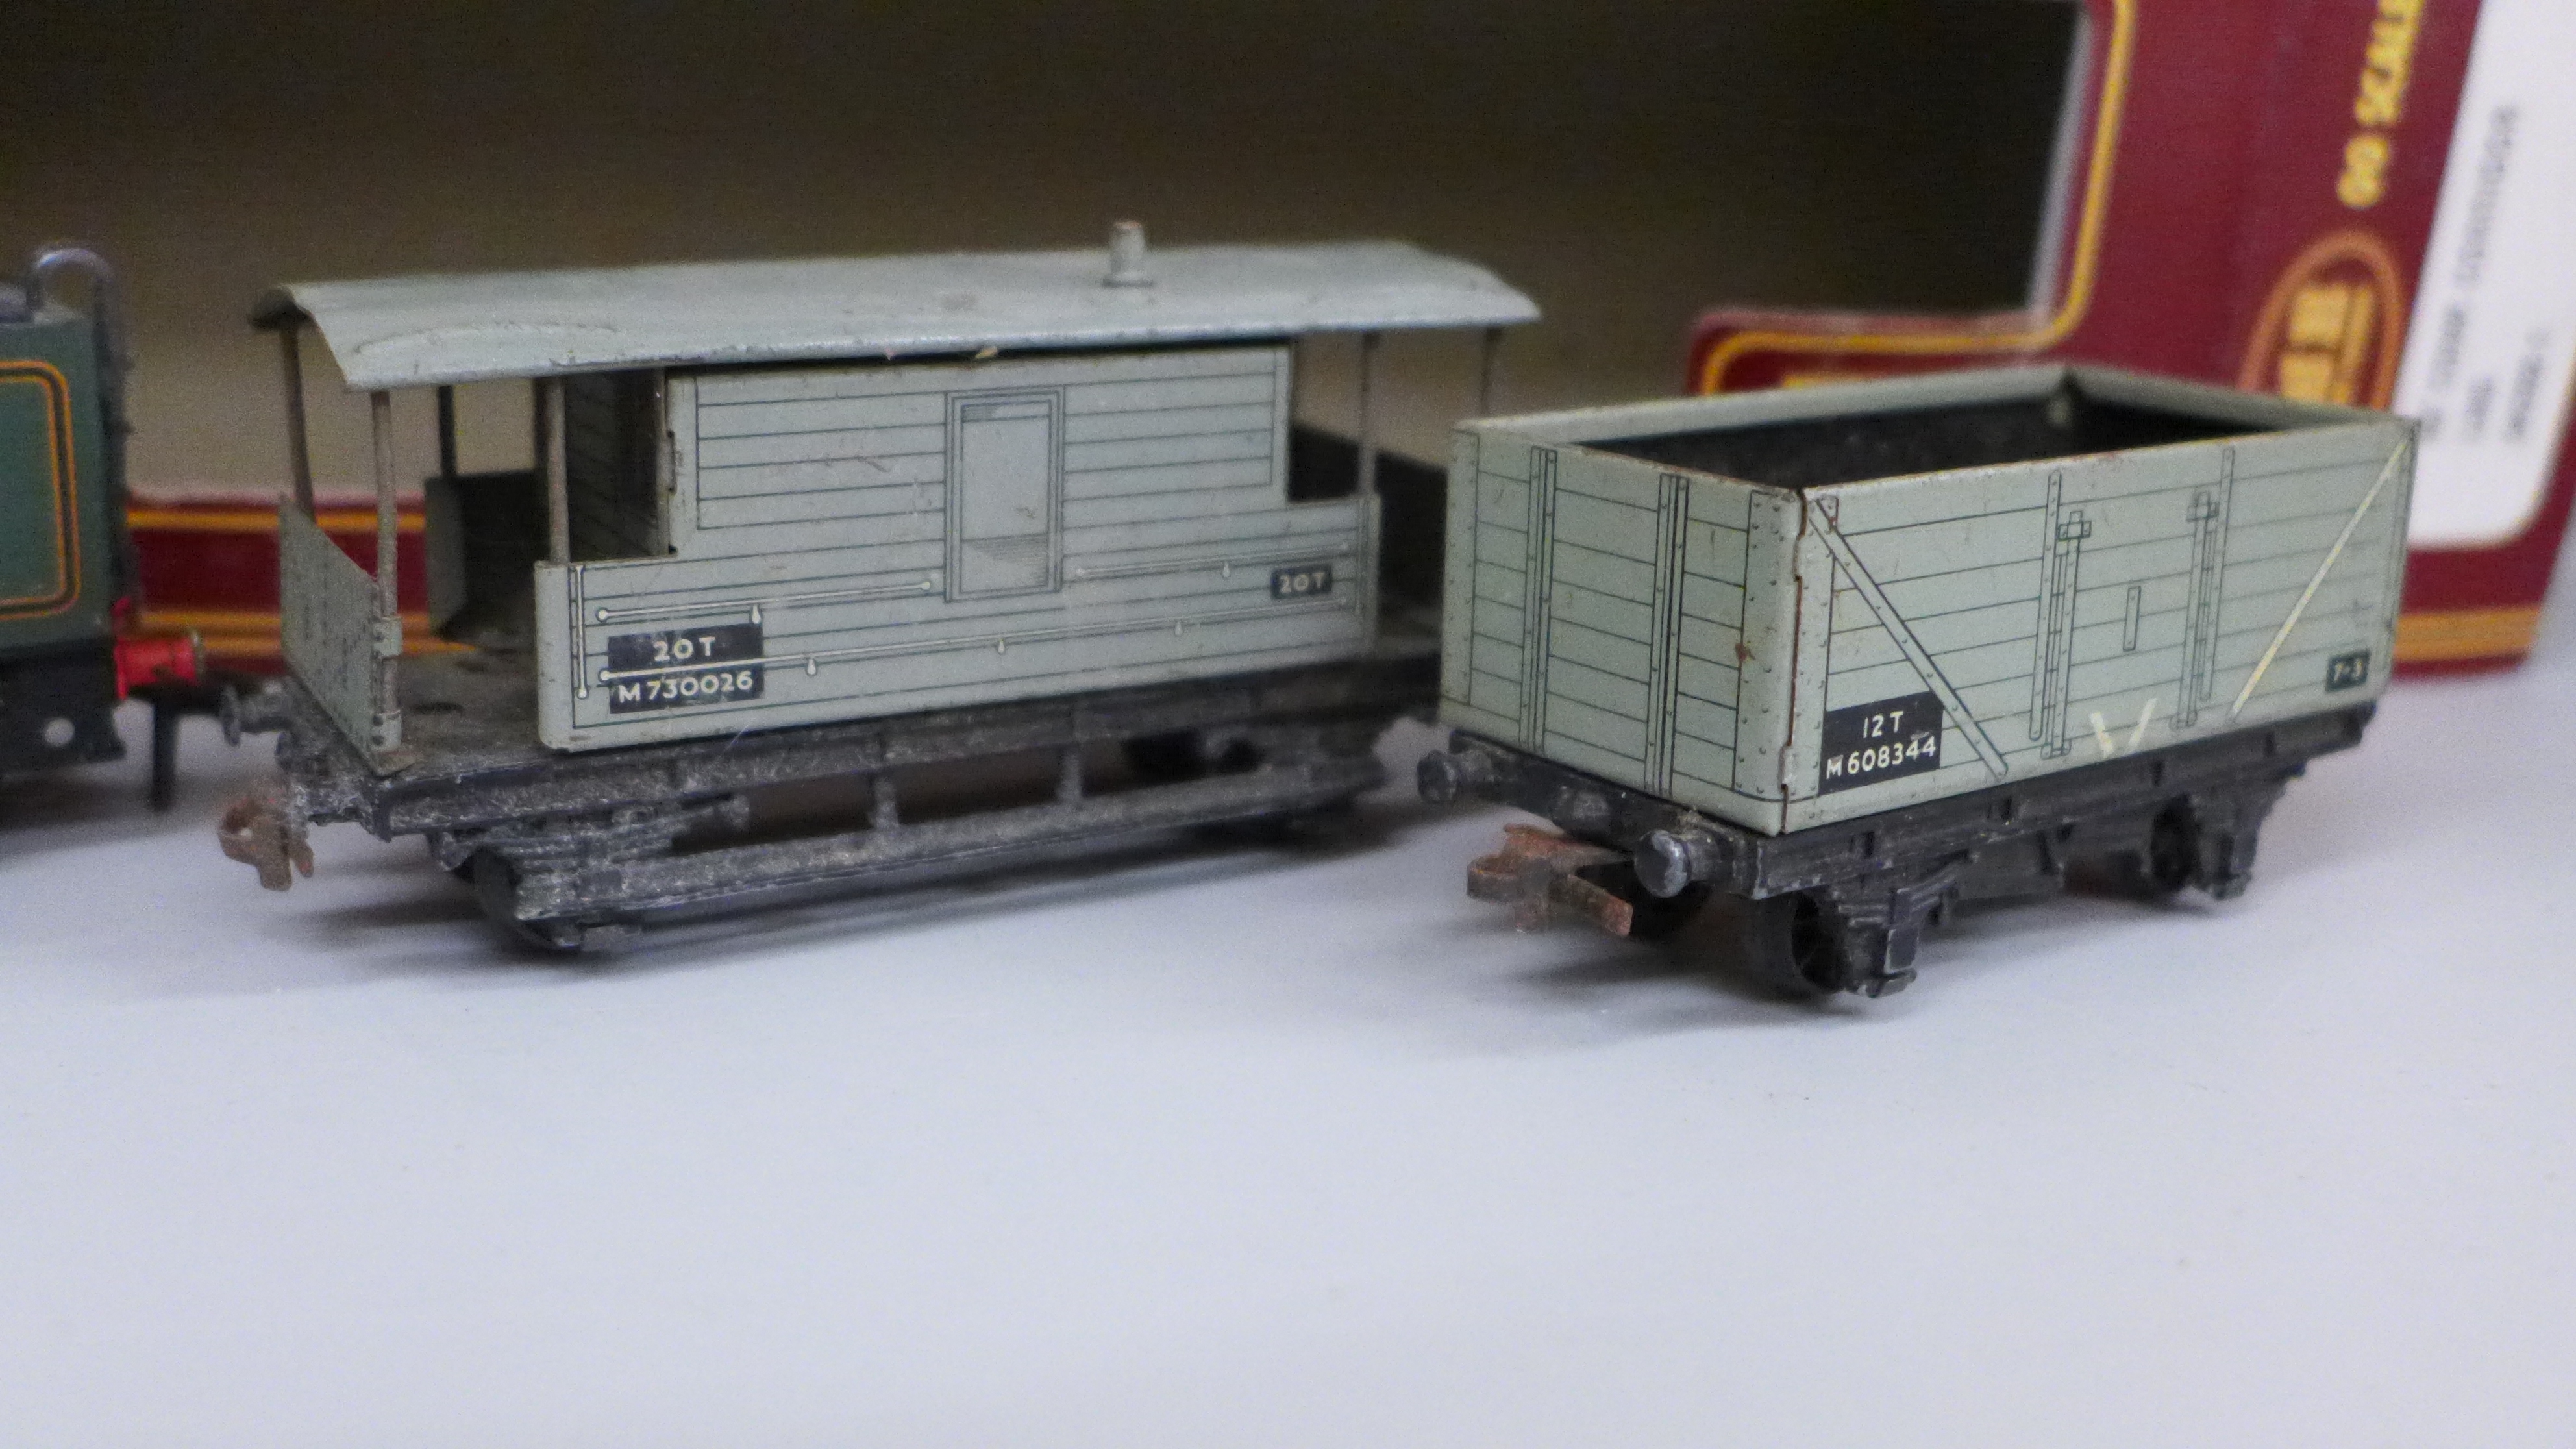 A collection of OO gauge coaches and wagons including Pullman and Corridor LMS GMR coach, boxed - Image 4 of 4